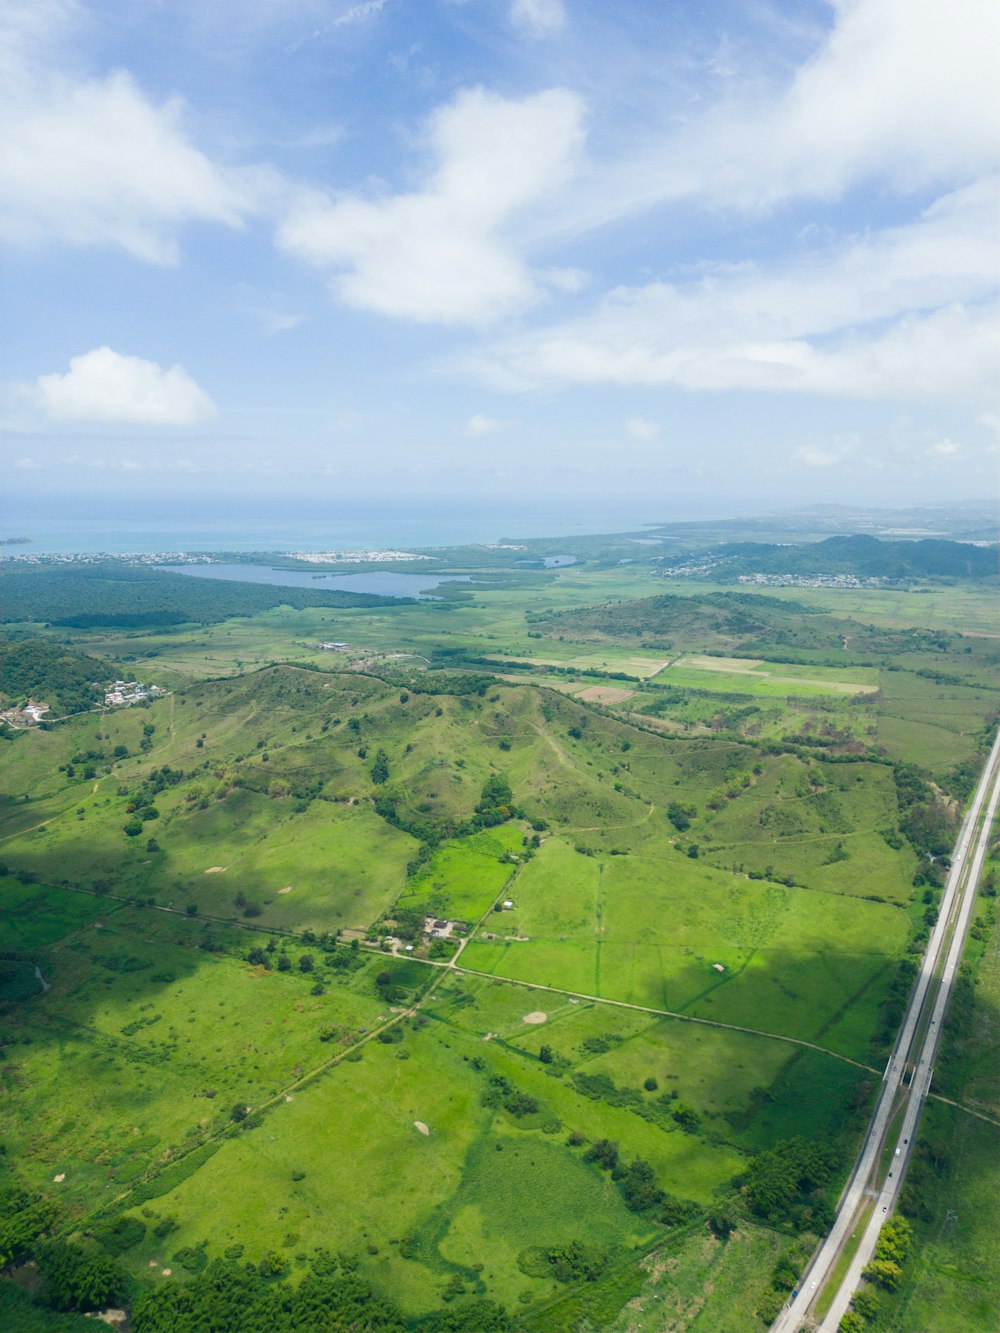 an aerial view of a highway running through a lush green countryside